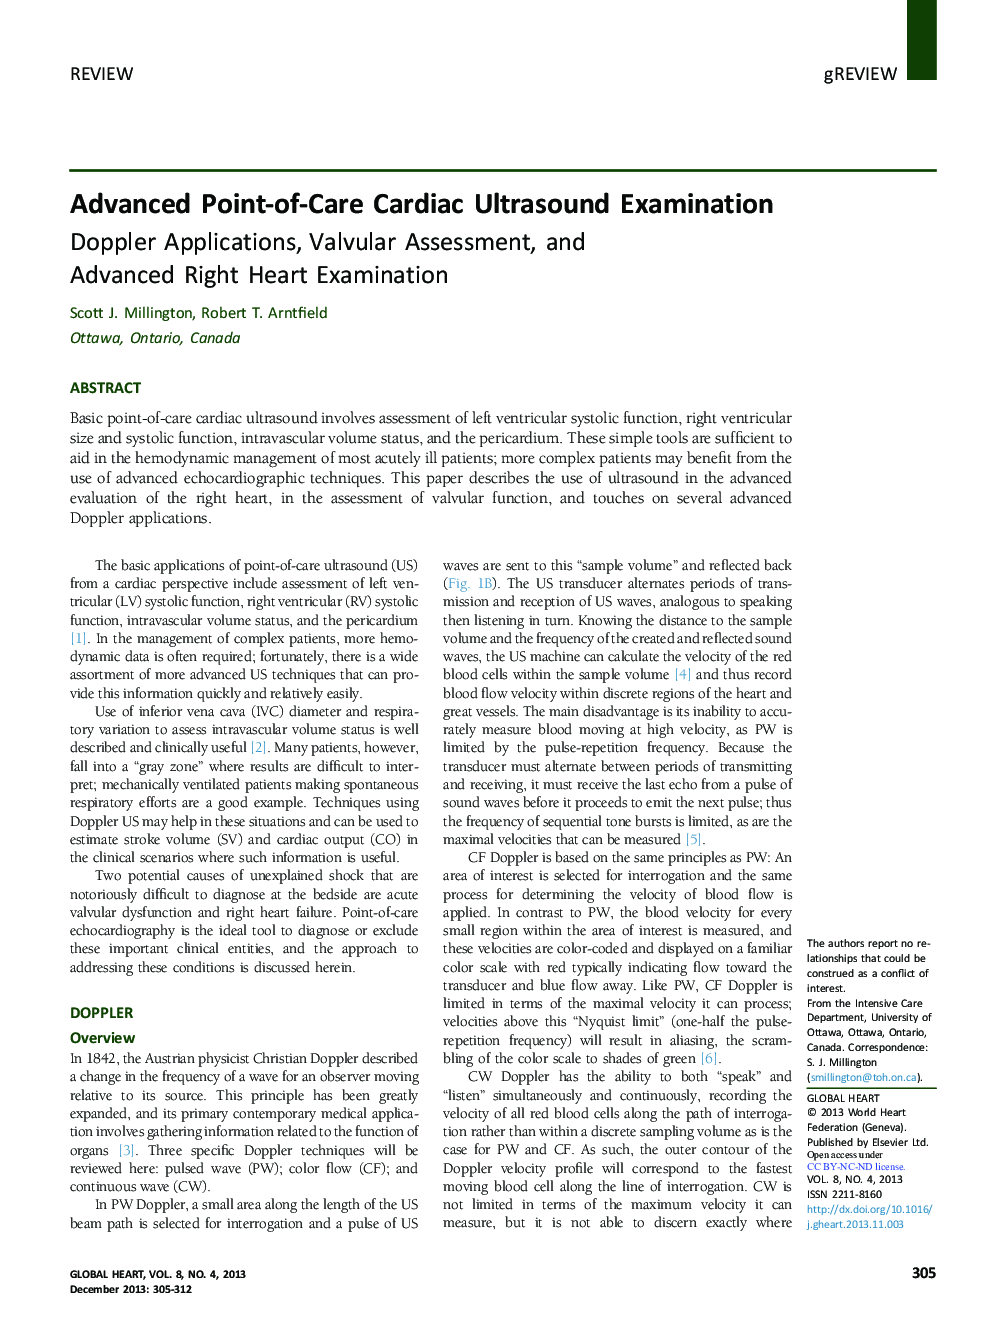 Advanced Point-of-Care Cardiac Ultrasound Examination: Doppler Applications, Valvular Assessment, and Advanced Right Heart Examination